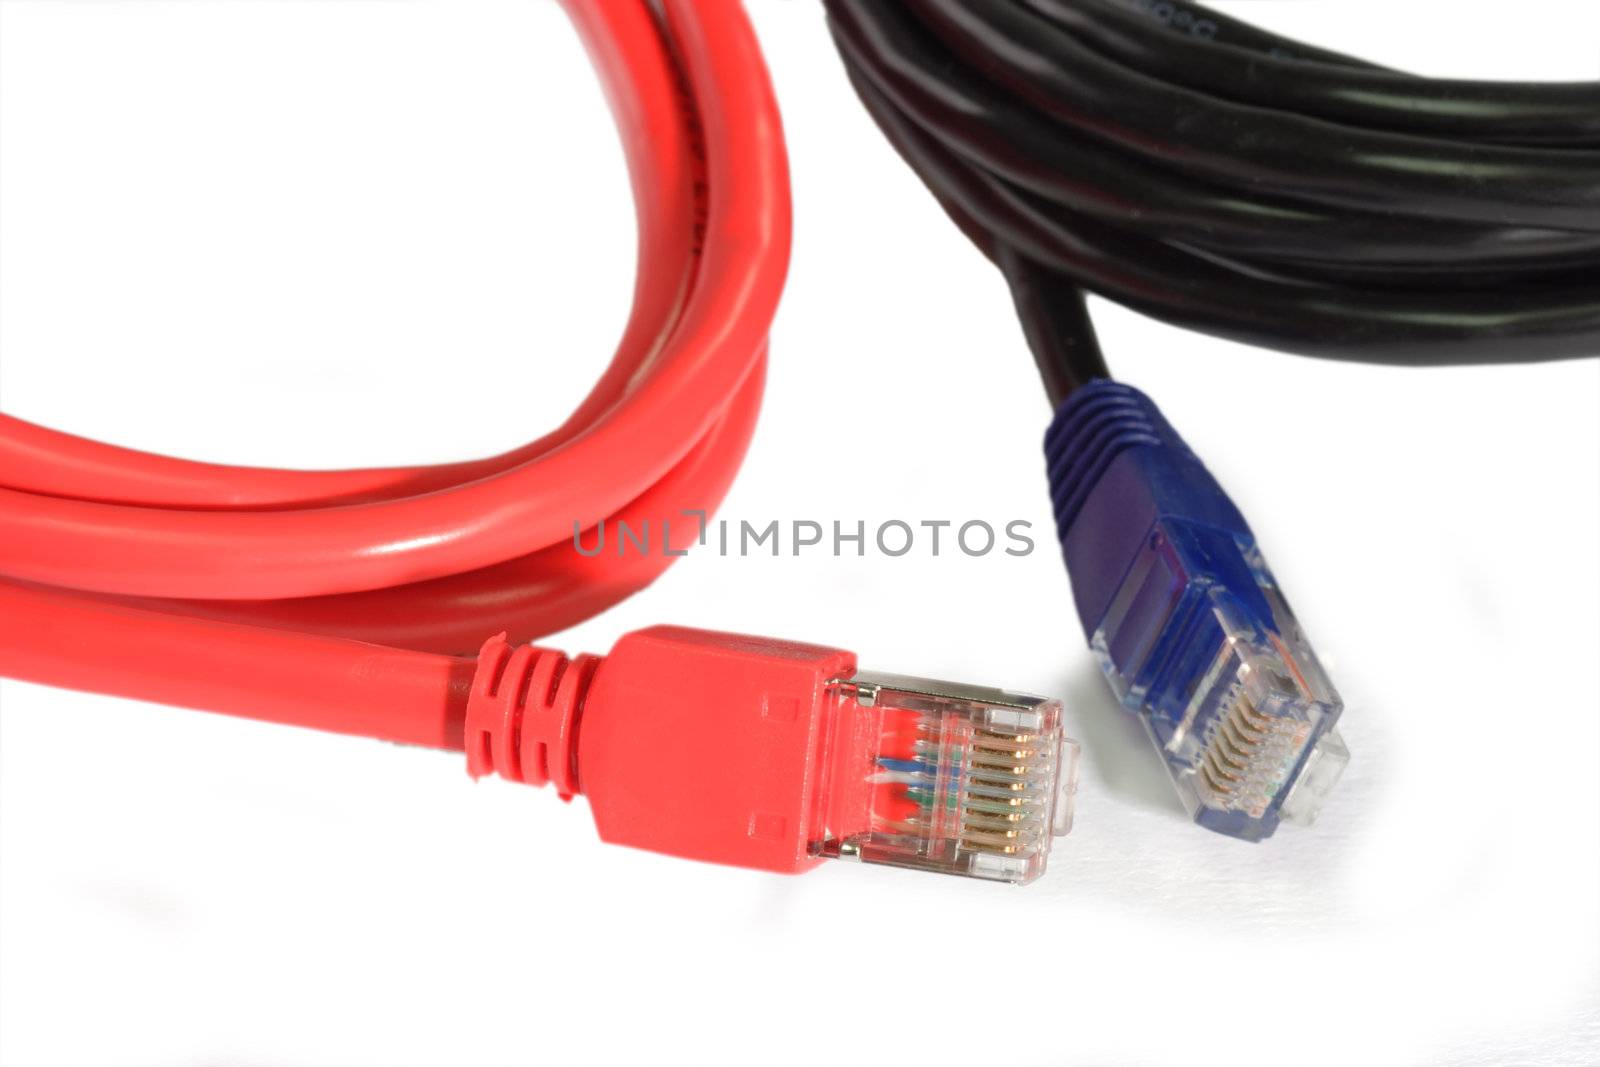 Two network cables on light background